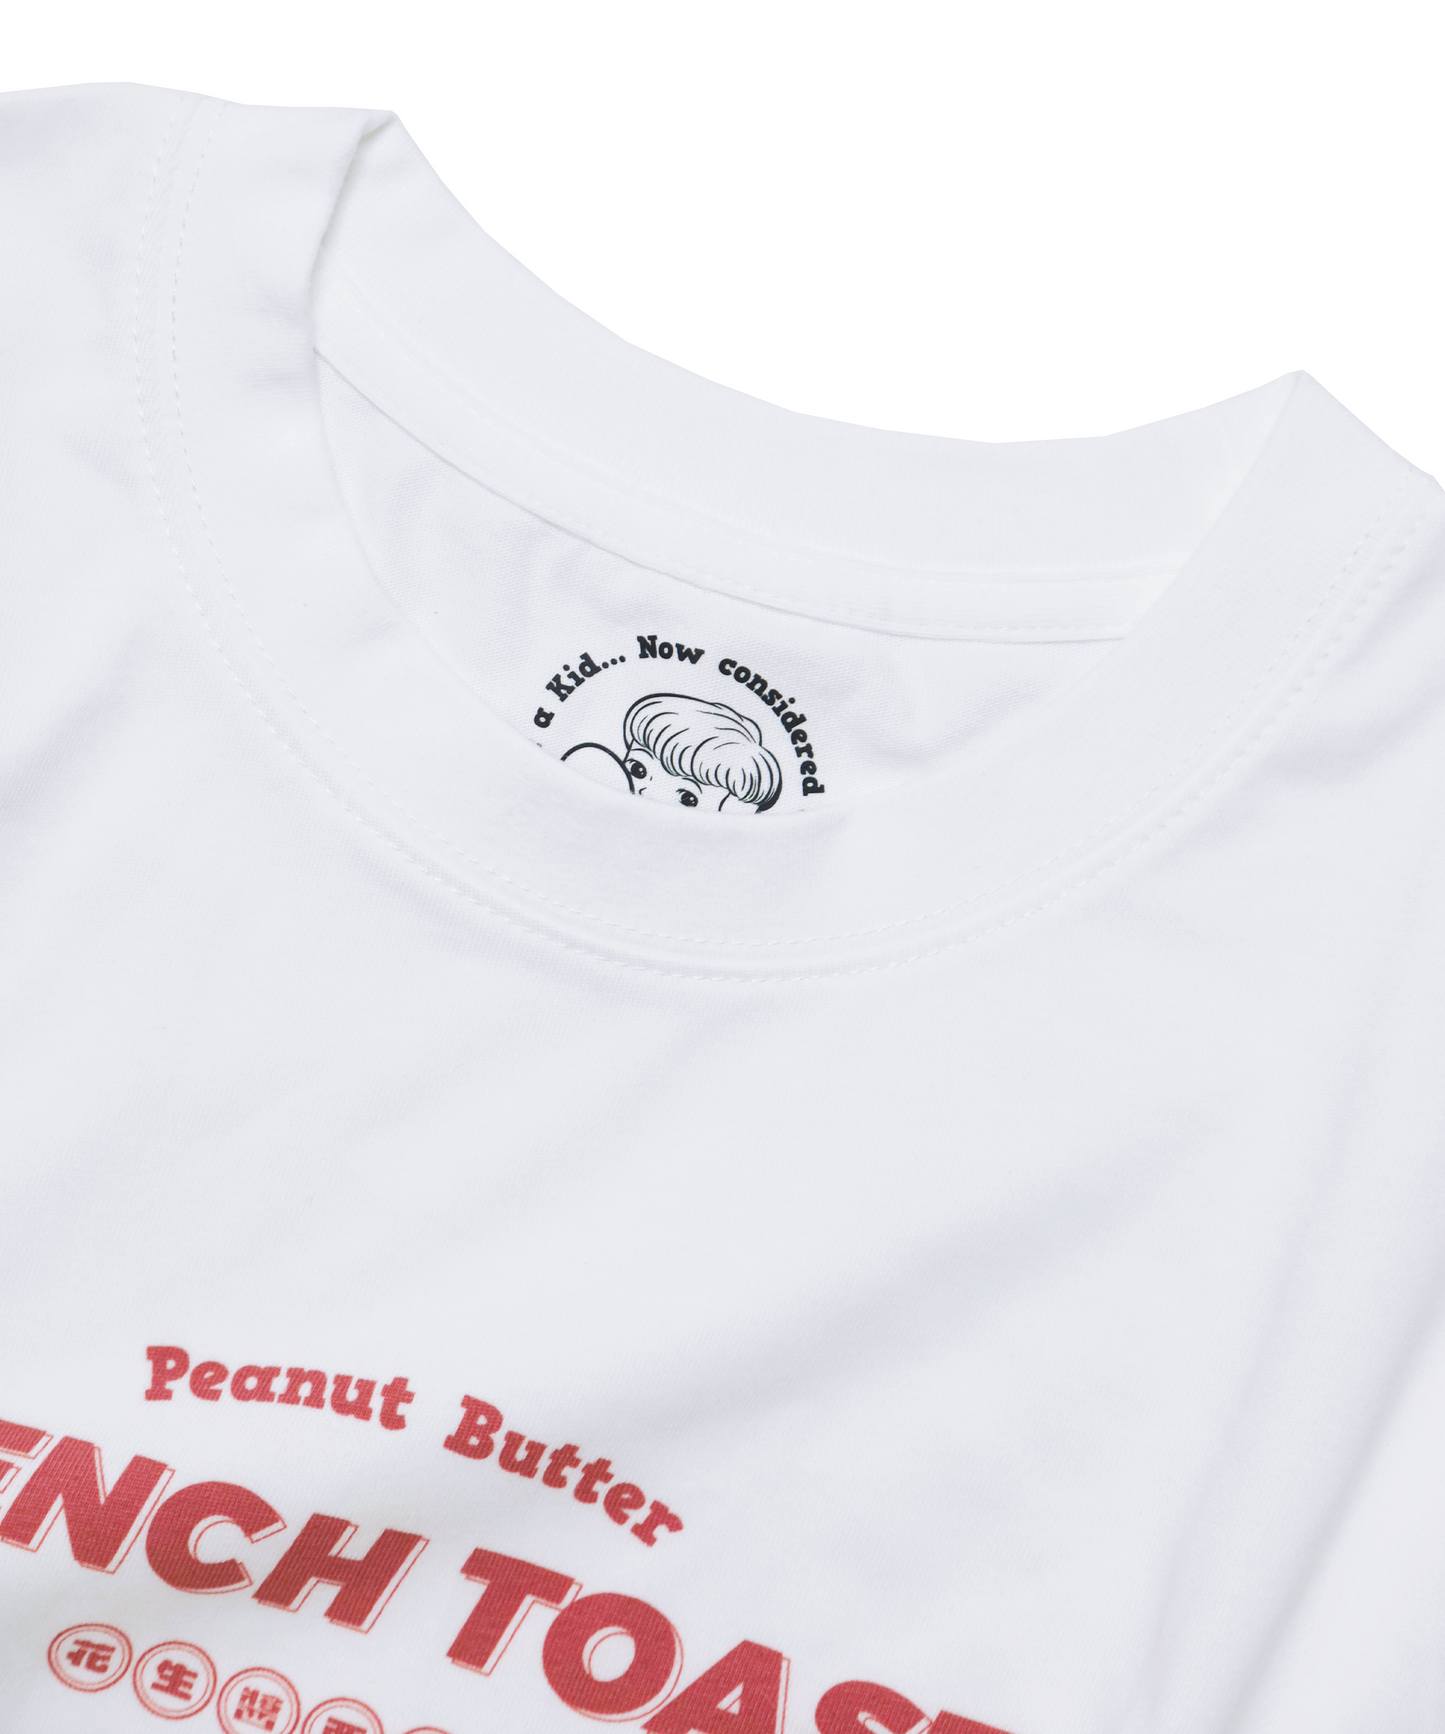 French Toast with Peanut Butter Retro T-shirt Series